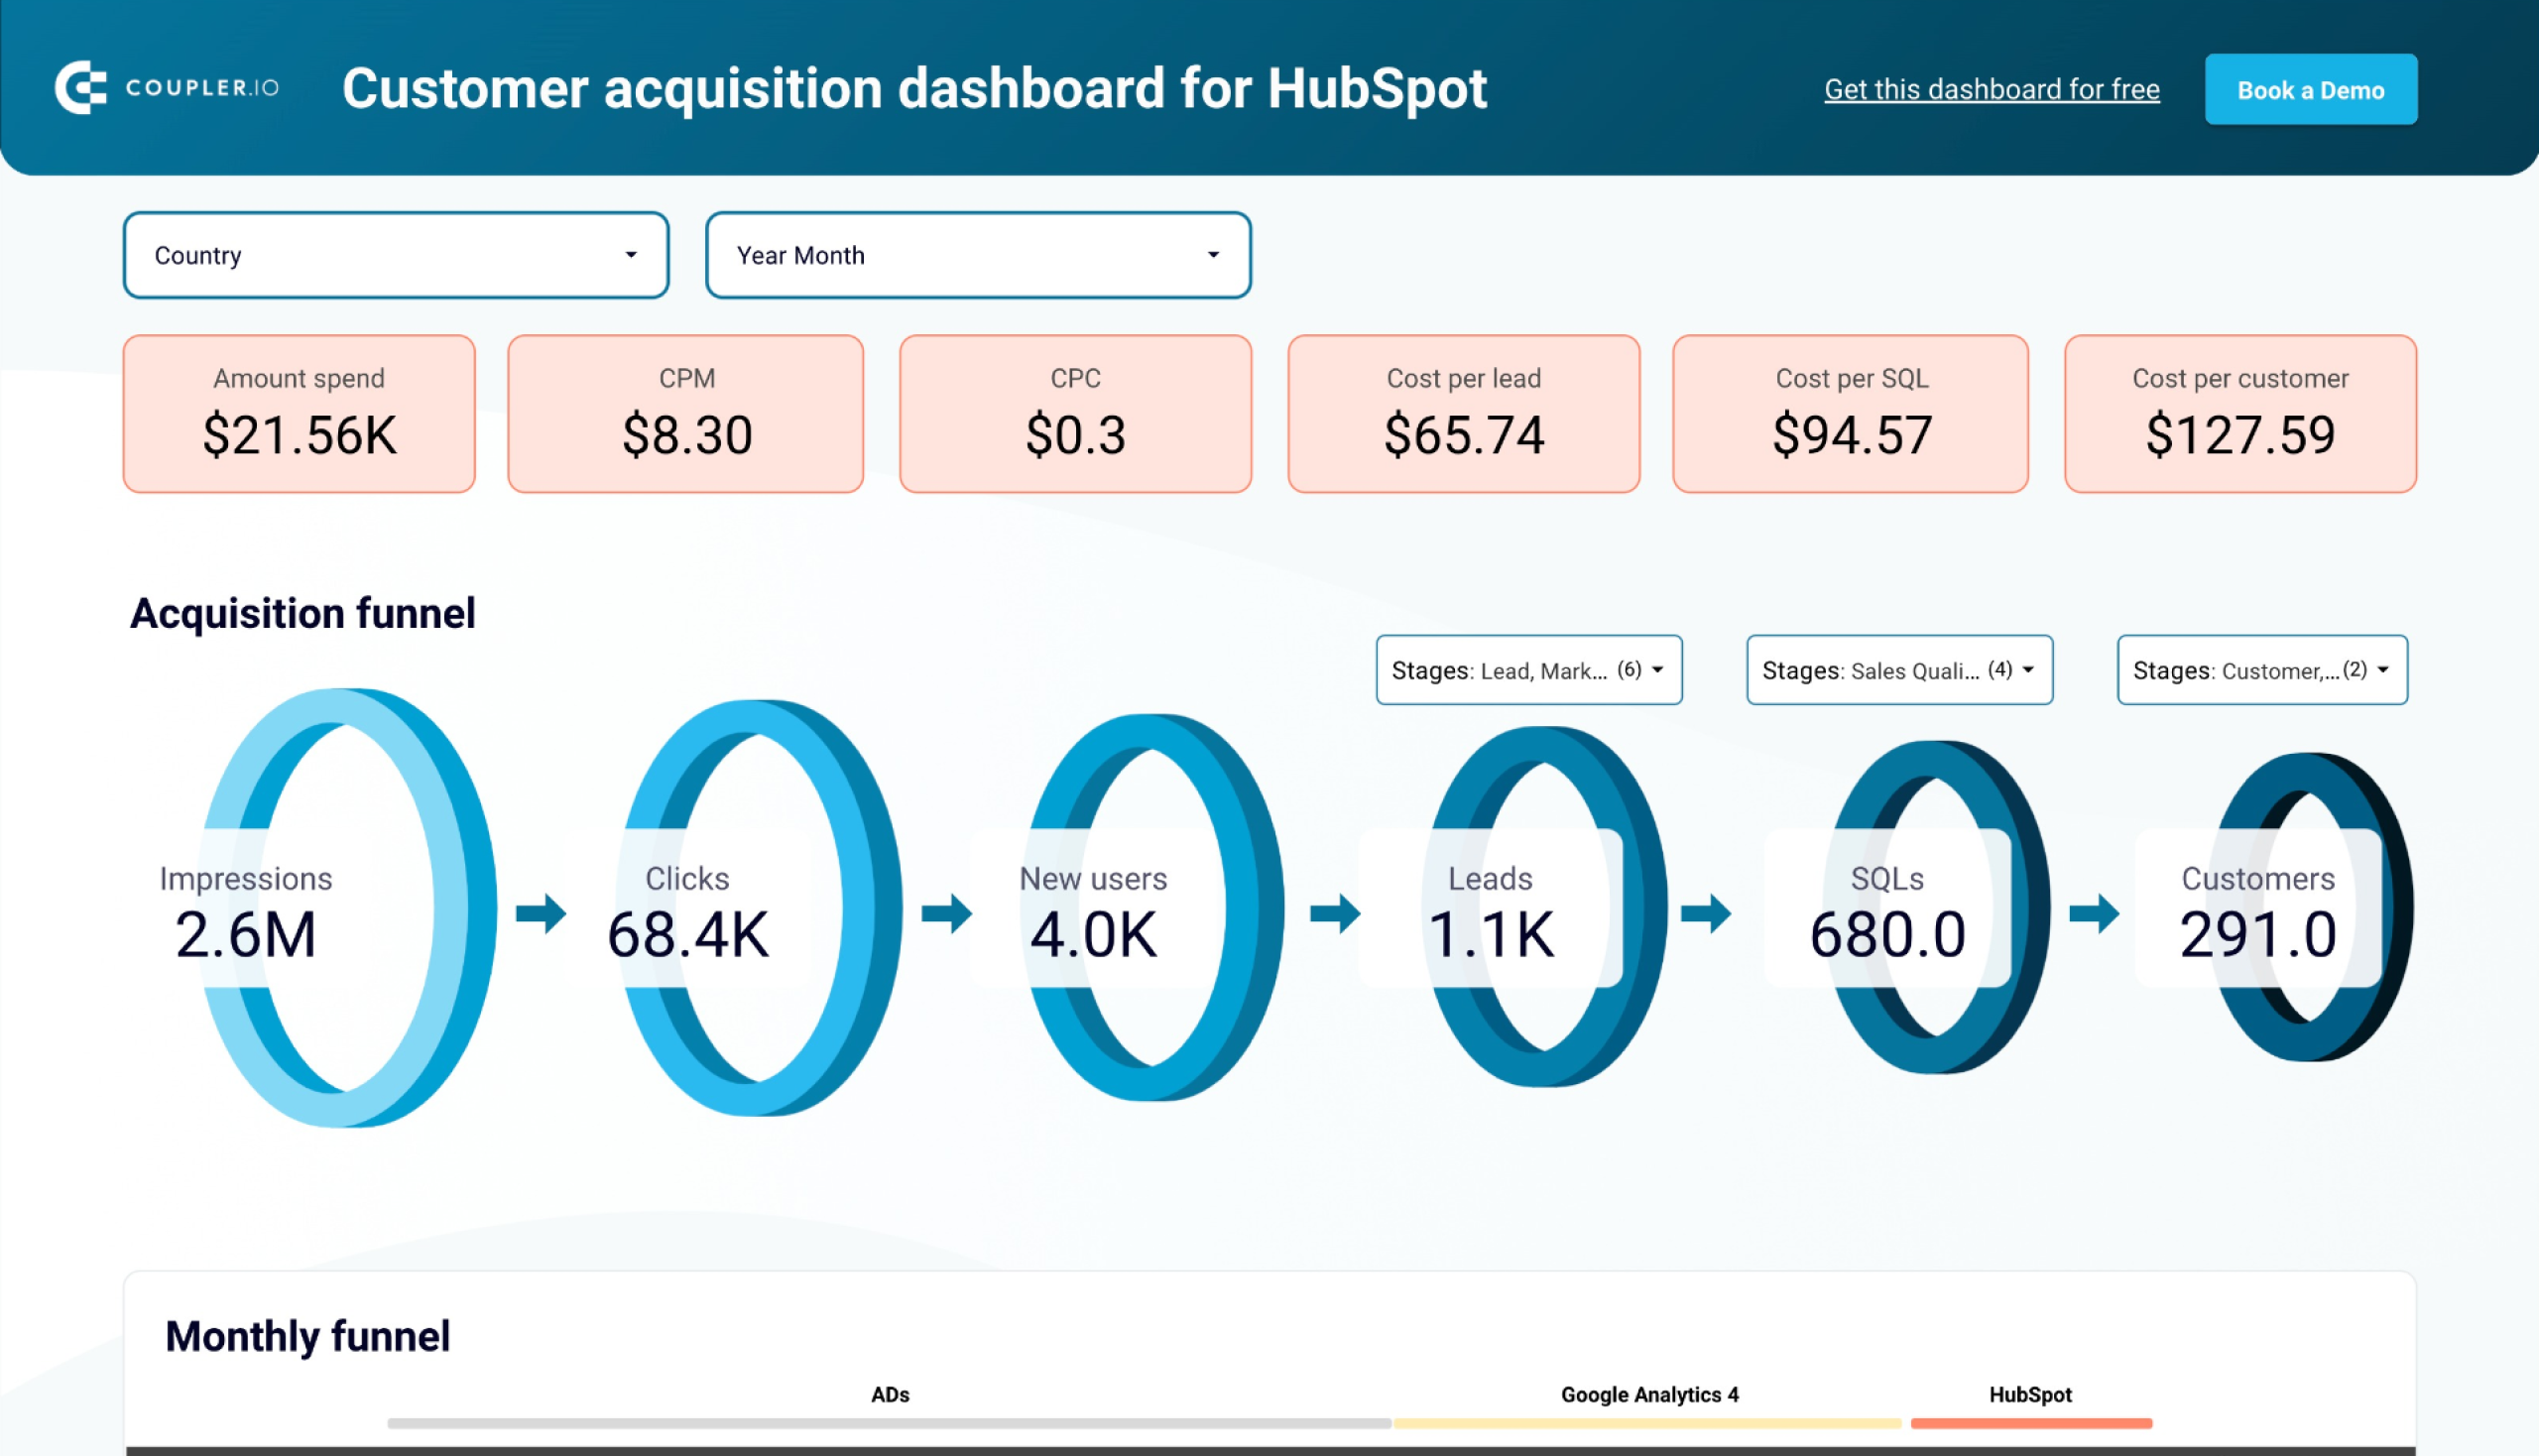 Customer acquisition dashboard for HubSpot image